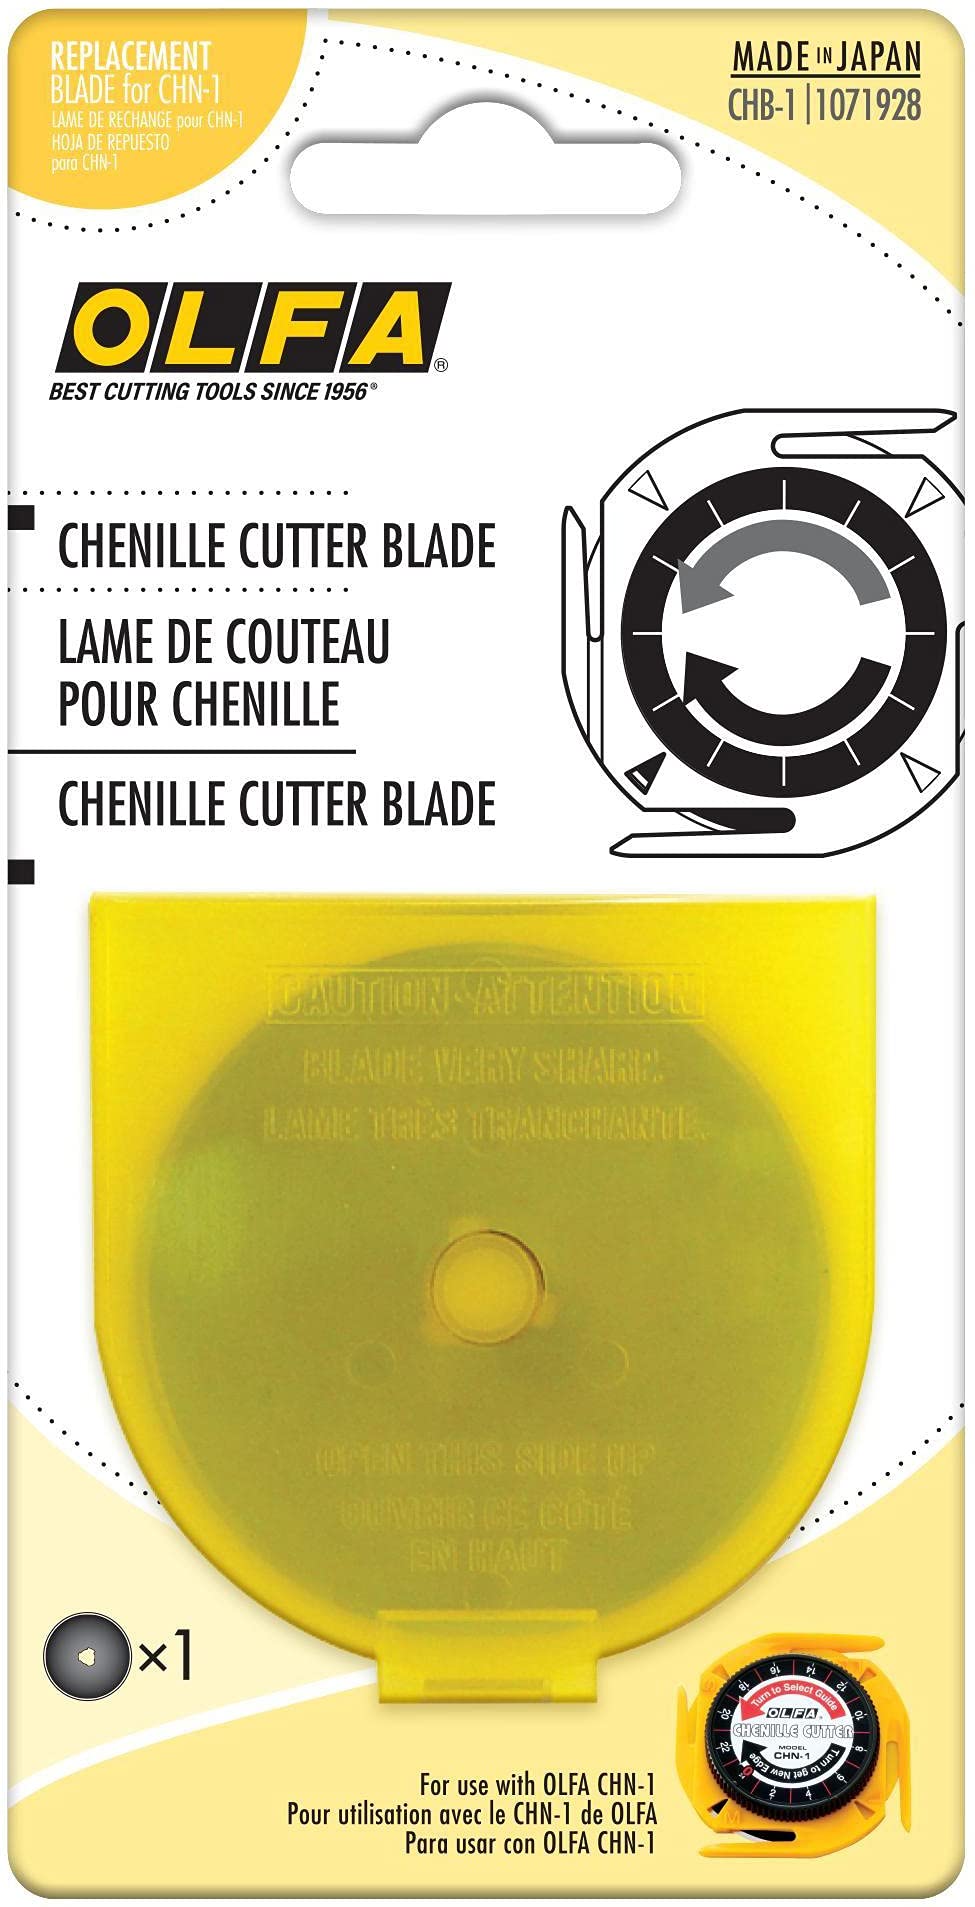 OLFA Chenille Cutter Replacement Blade, 1 Blade (CHB-1) - Tungsten Steel  Circular Rotary Cutter Blade for Chenille Fabric, Crafts, Sewing, Quilting,  Replacement Blade: Fits OLFA CHN-1 Chenille Cutter